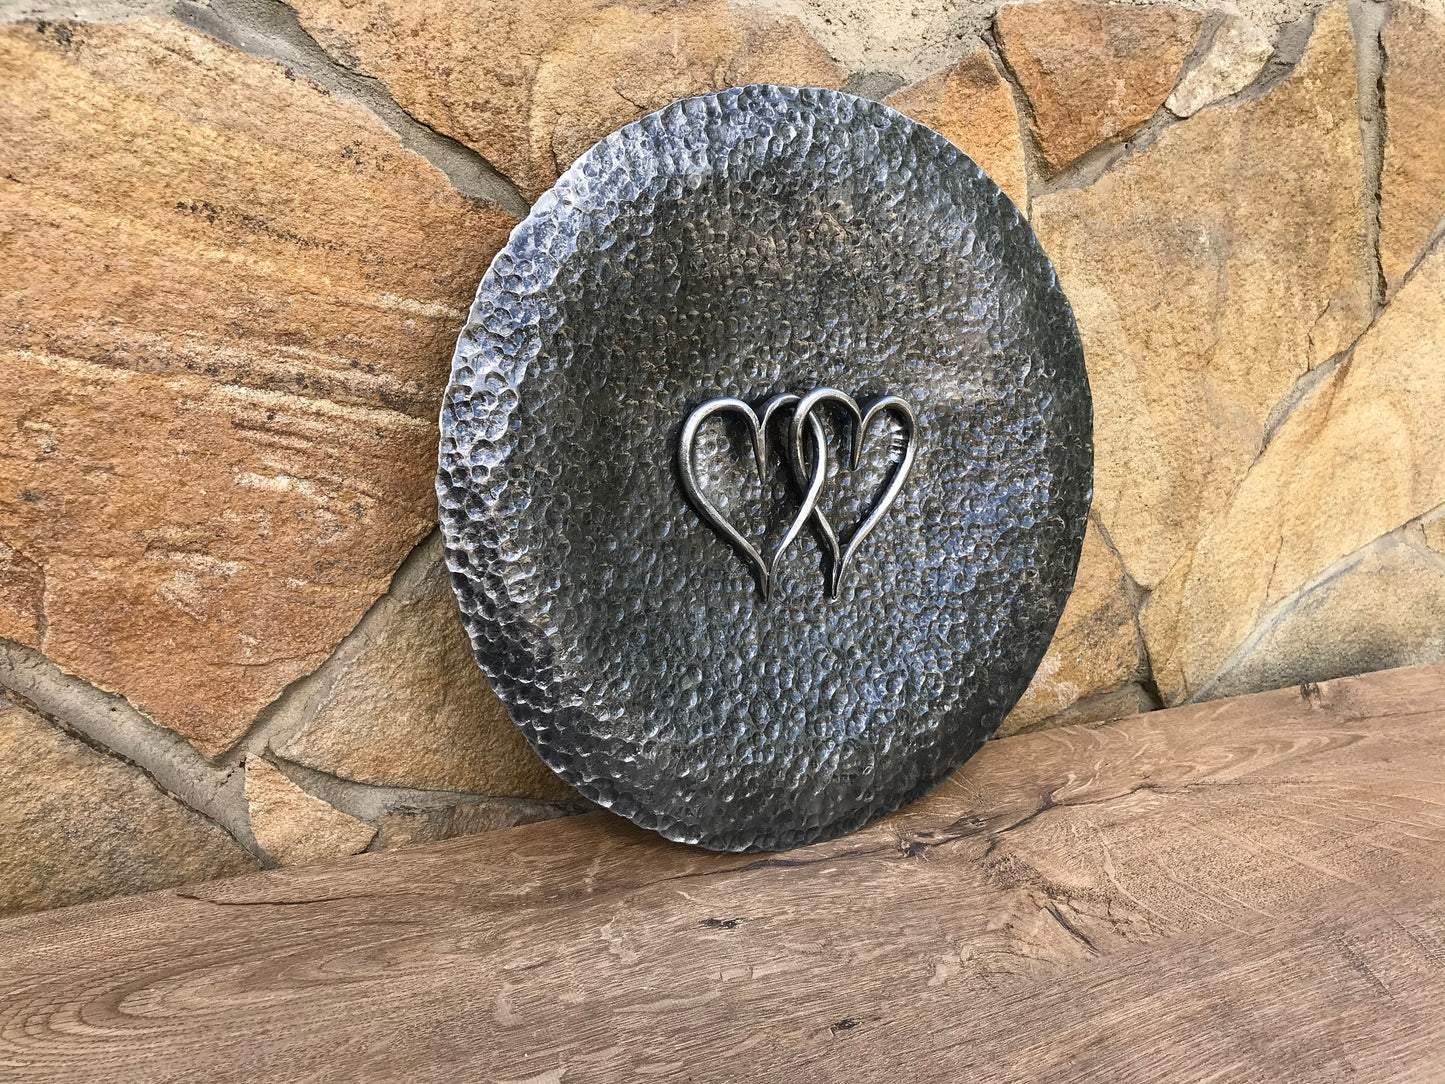 Personalized bowl, iron bowl, 6th anniversary gift, tray, bowl, iron anniversary, 6 year anniversary, iron hearts, iron gift, steel gift